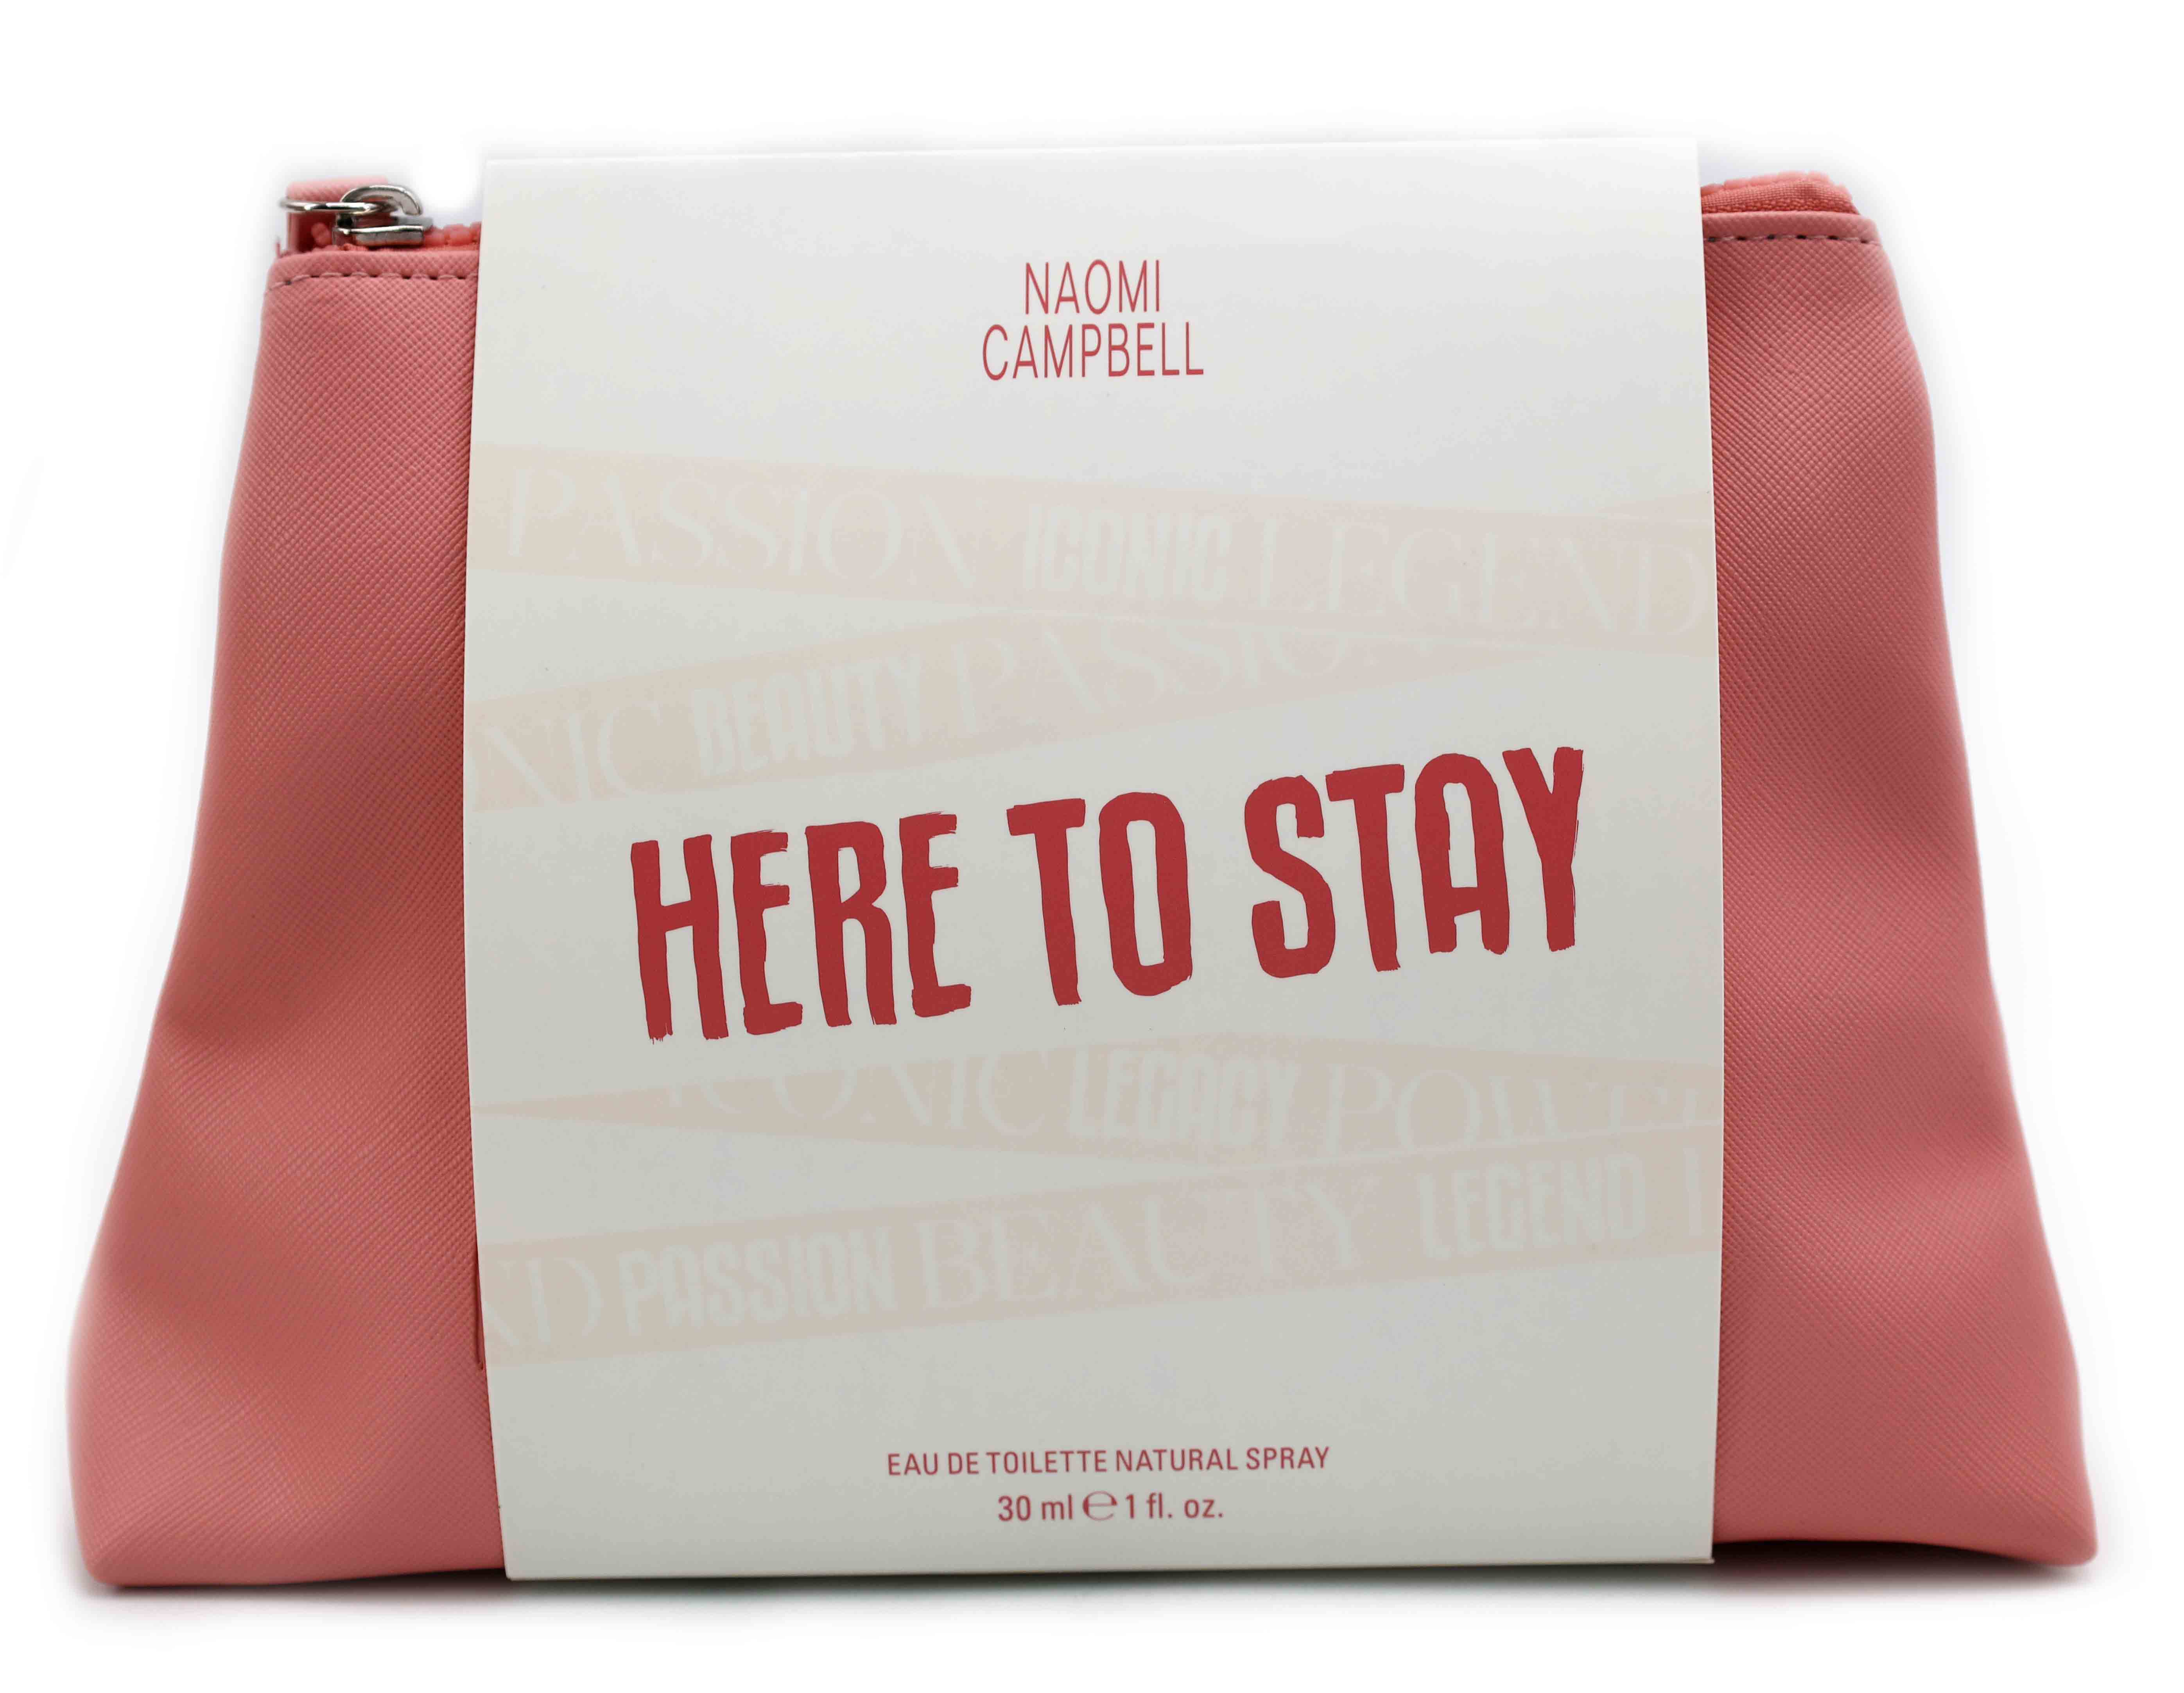 Naomi Campbell Geschenk-Set Here to stay